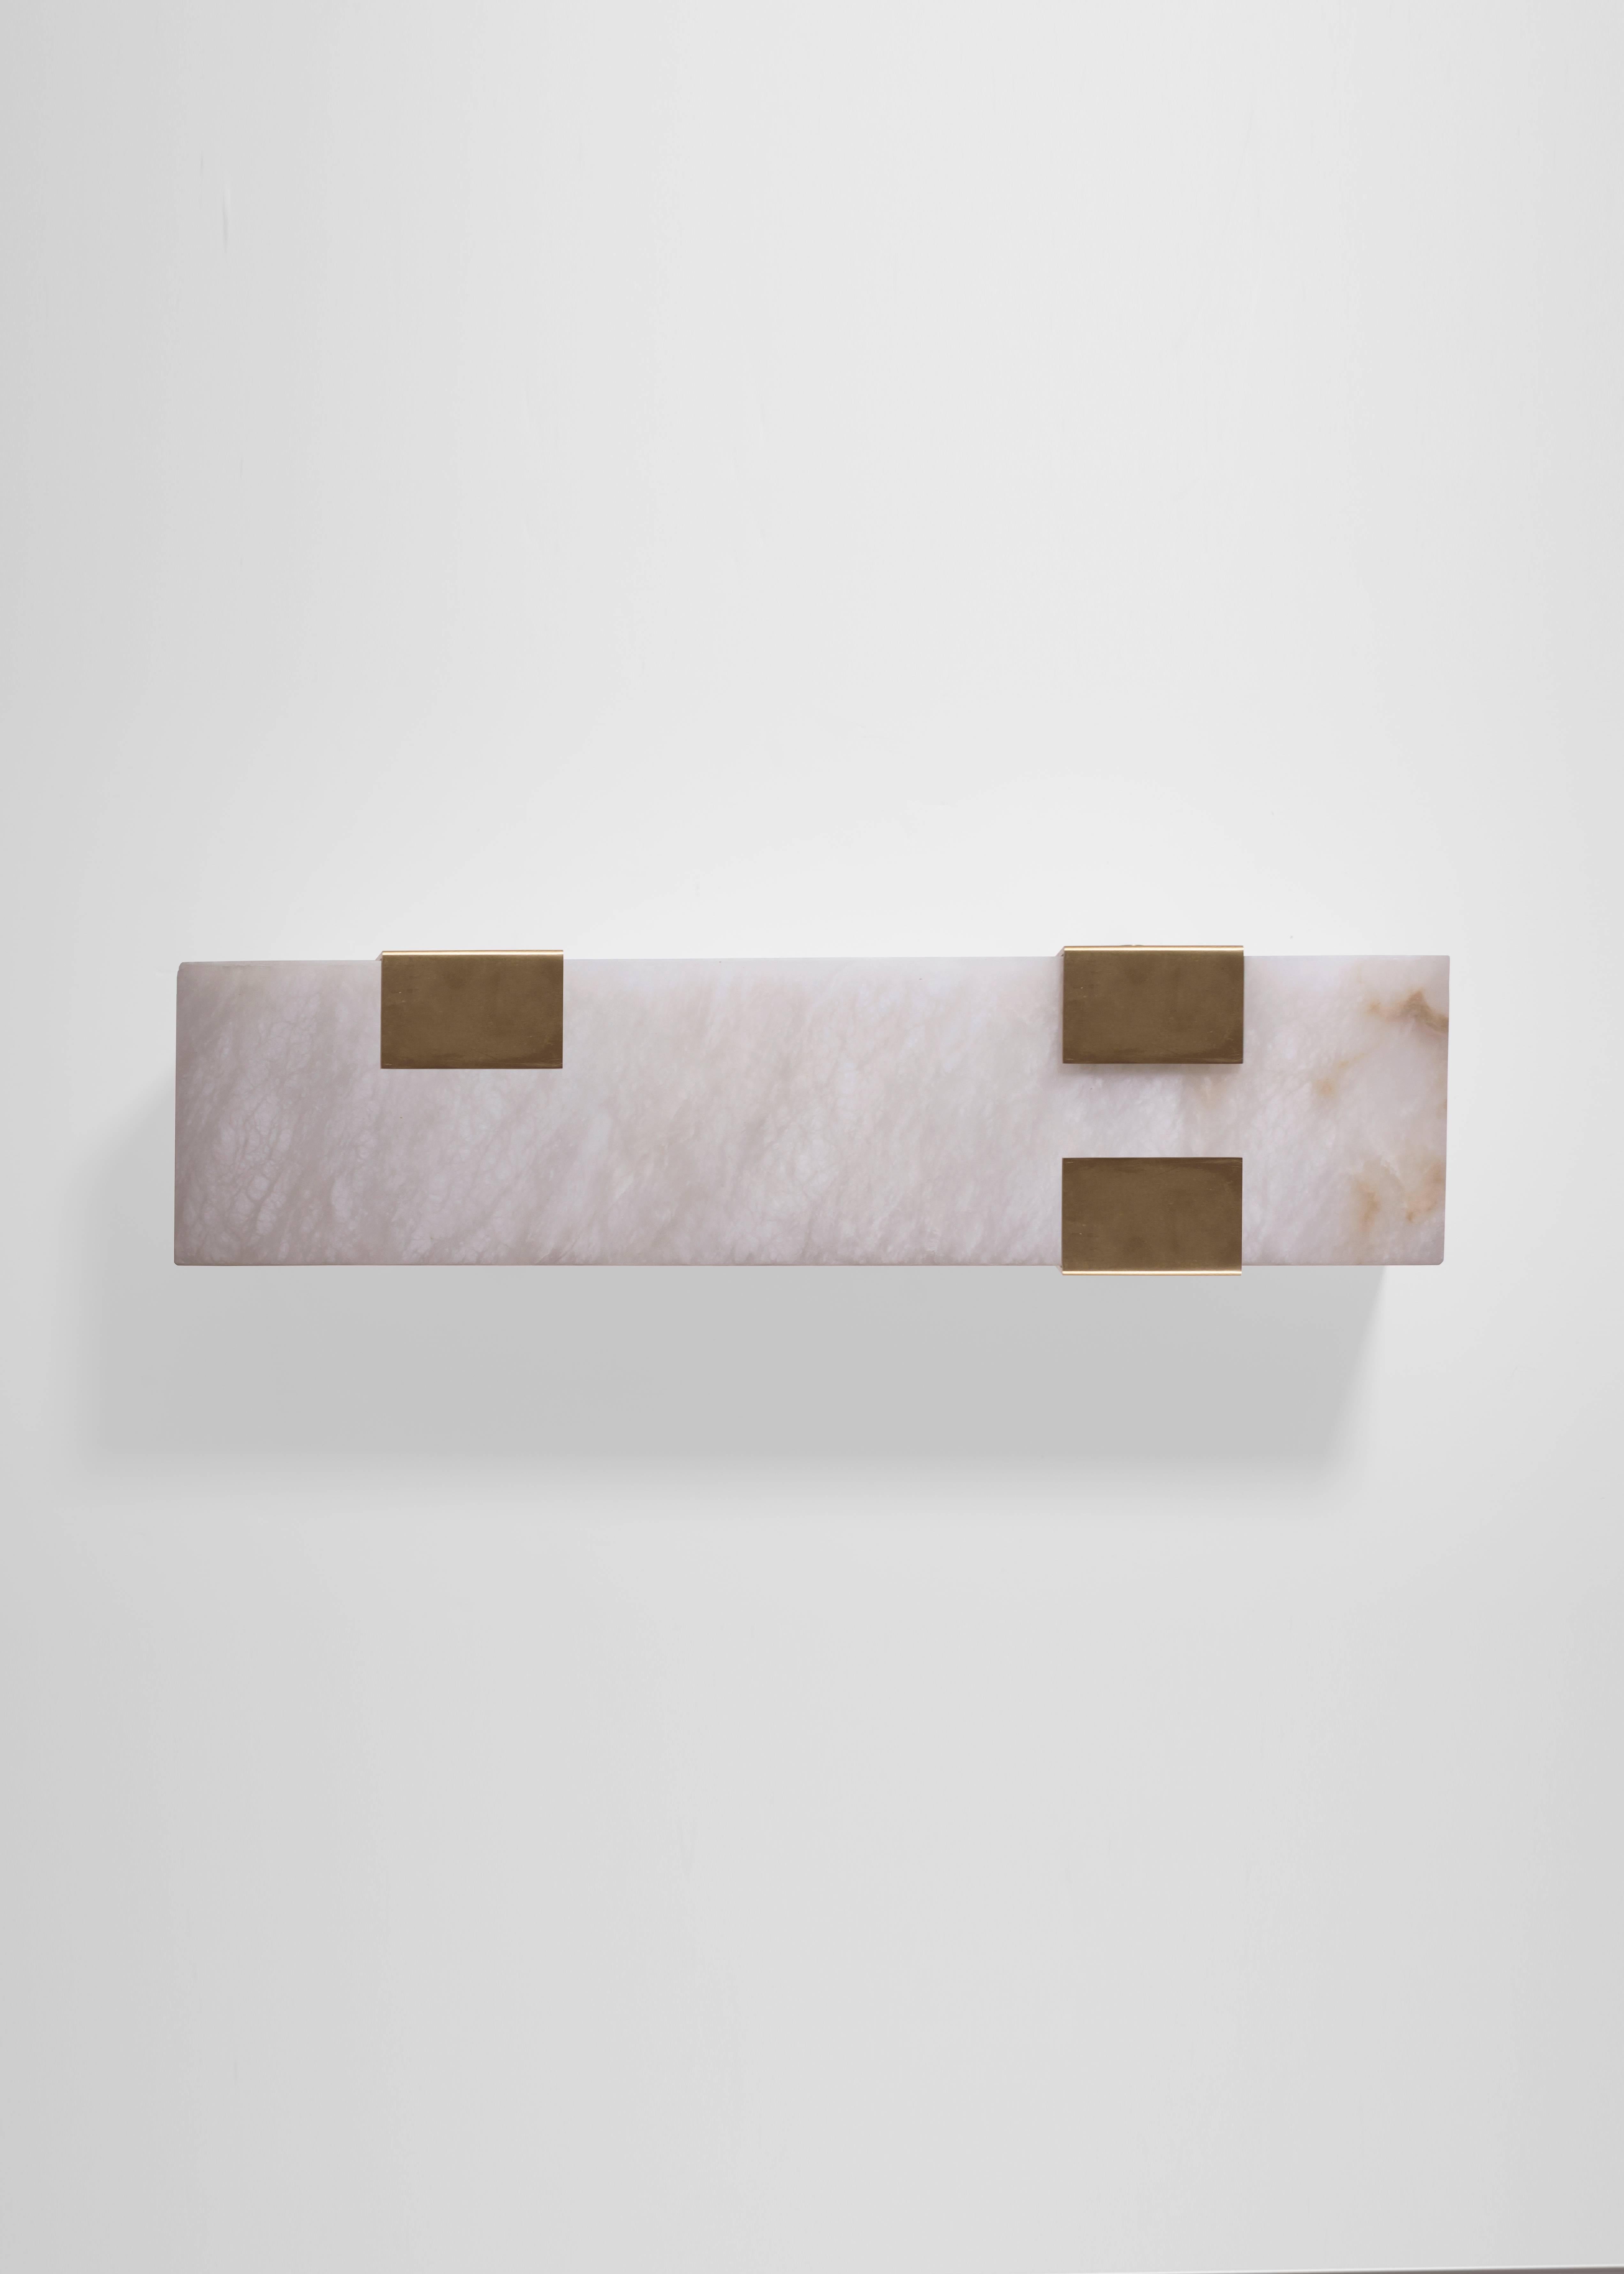 Orphan Work 003-3C Sconce, 2018
Shown in brushed brass and alabaster 
Available in brushed brass, brushed nickel and blackened brass
Measures: 5 3/8”H x 19”W x 3 7/8”D
Wall or ceiling mount
Vertical or horizontal
Plug-in by request
1-4 adjustable